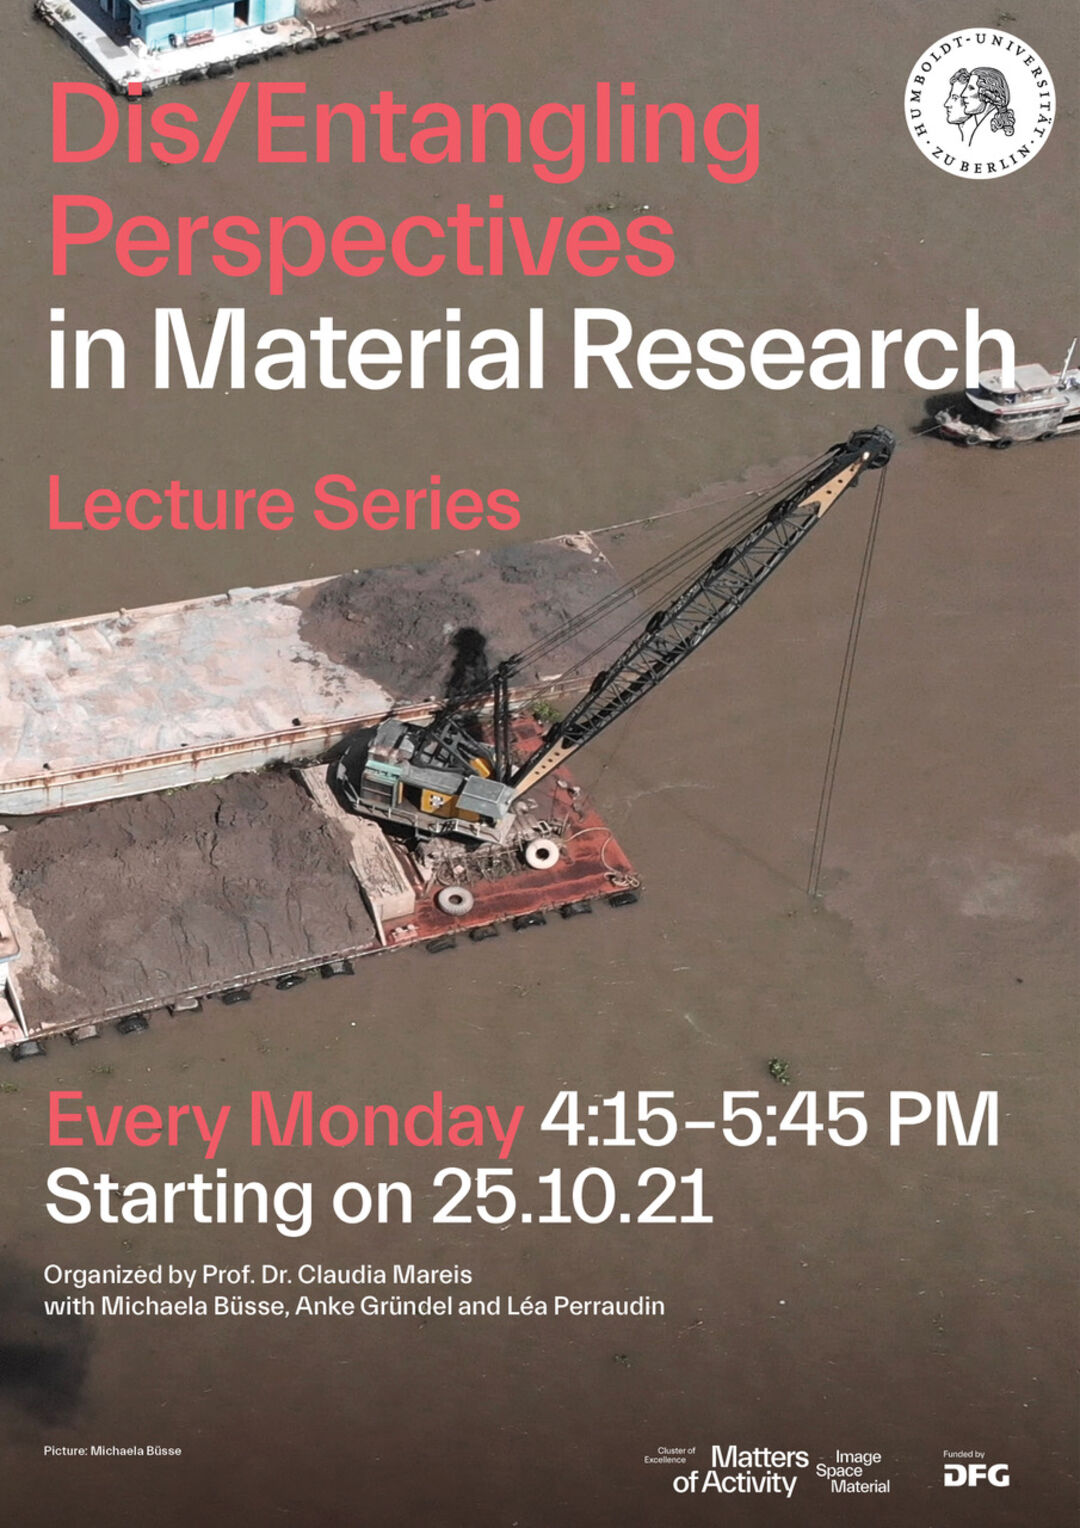 Poster »Dis/Entangling Perspectives in Material Research«. Copyright: Matters of Activity | Image: Michaela Büsse
